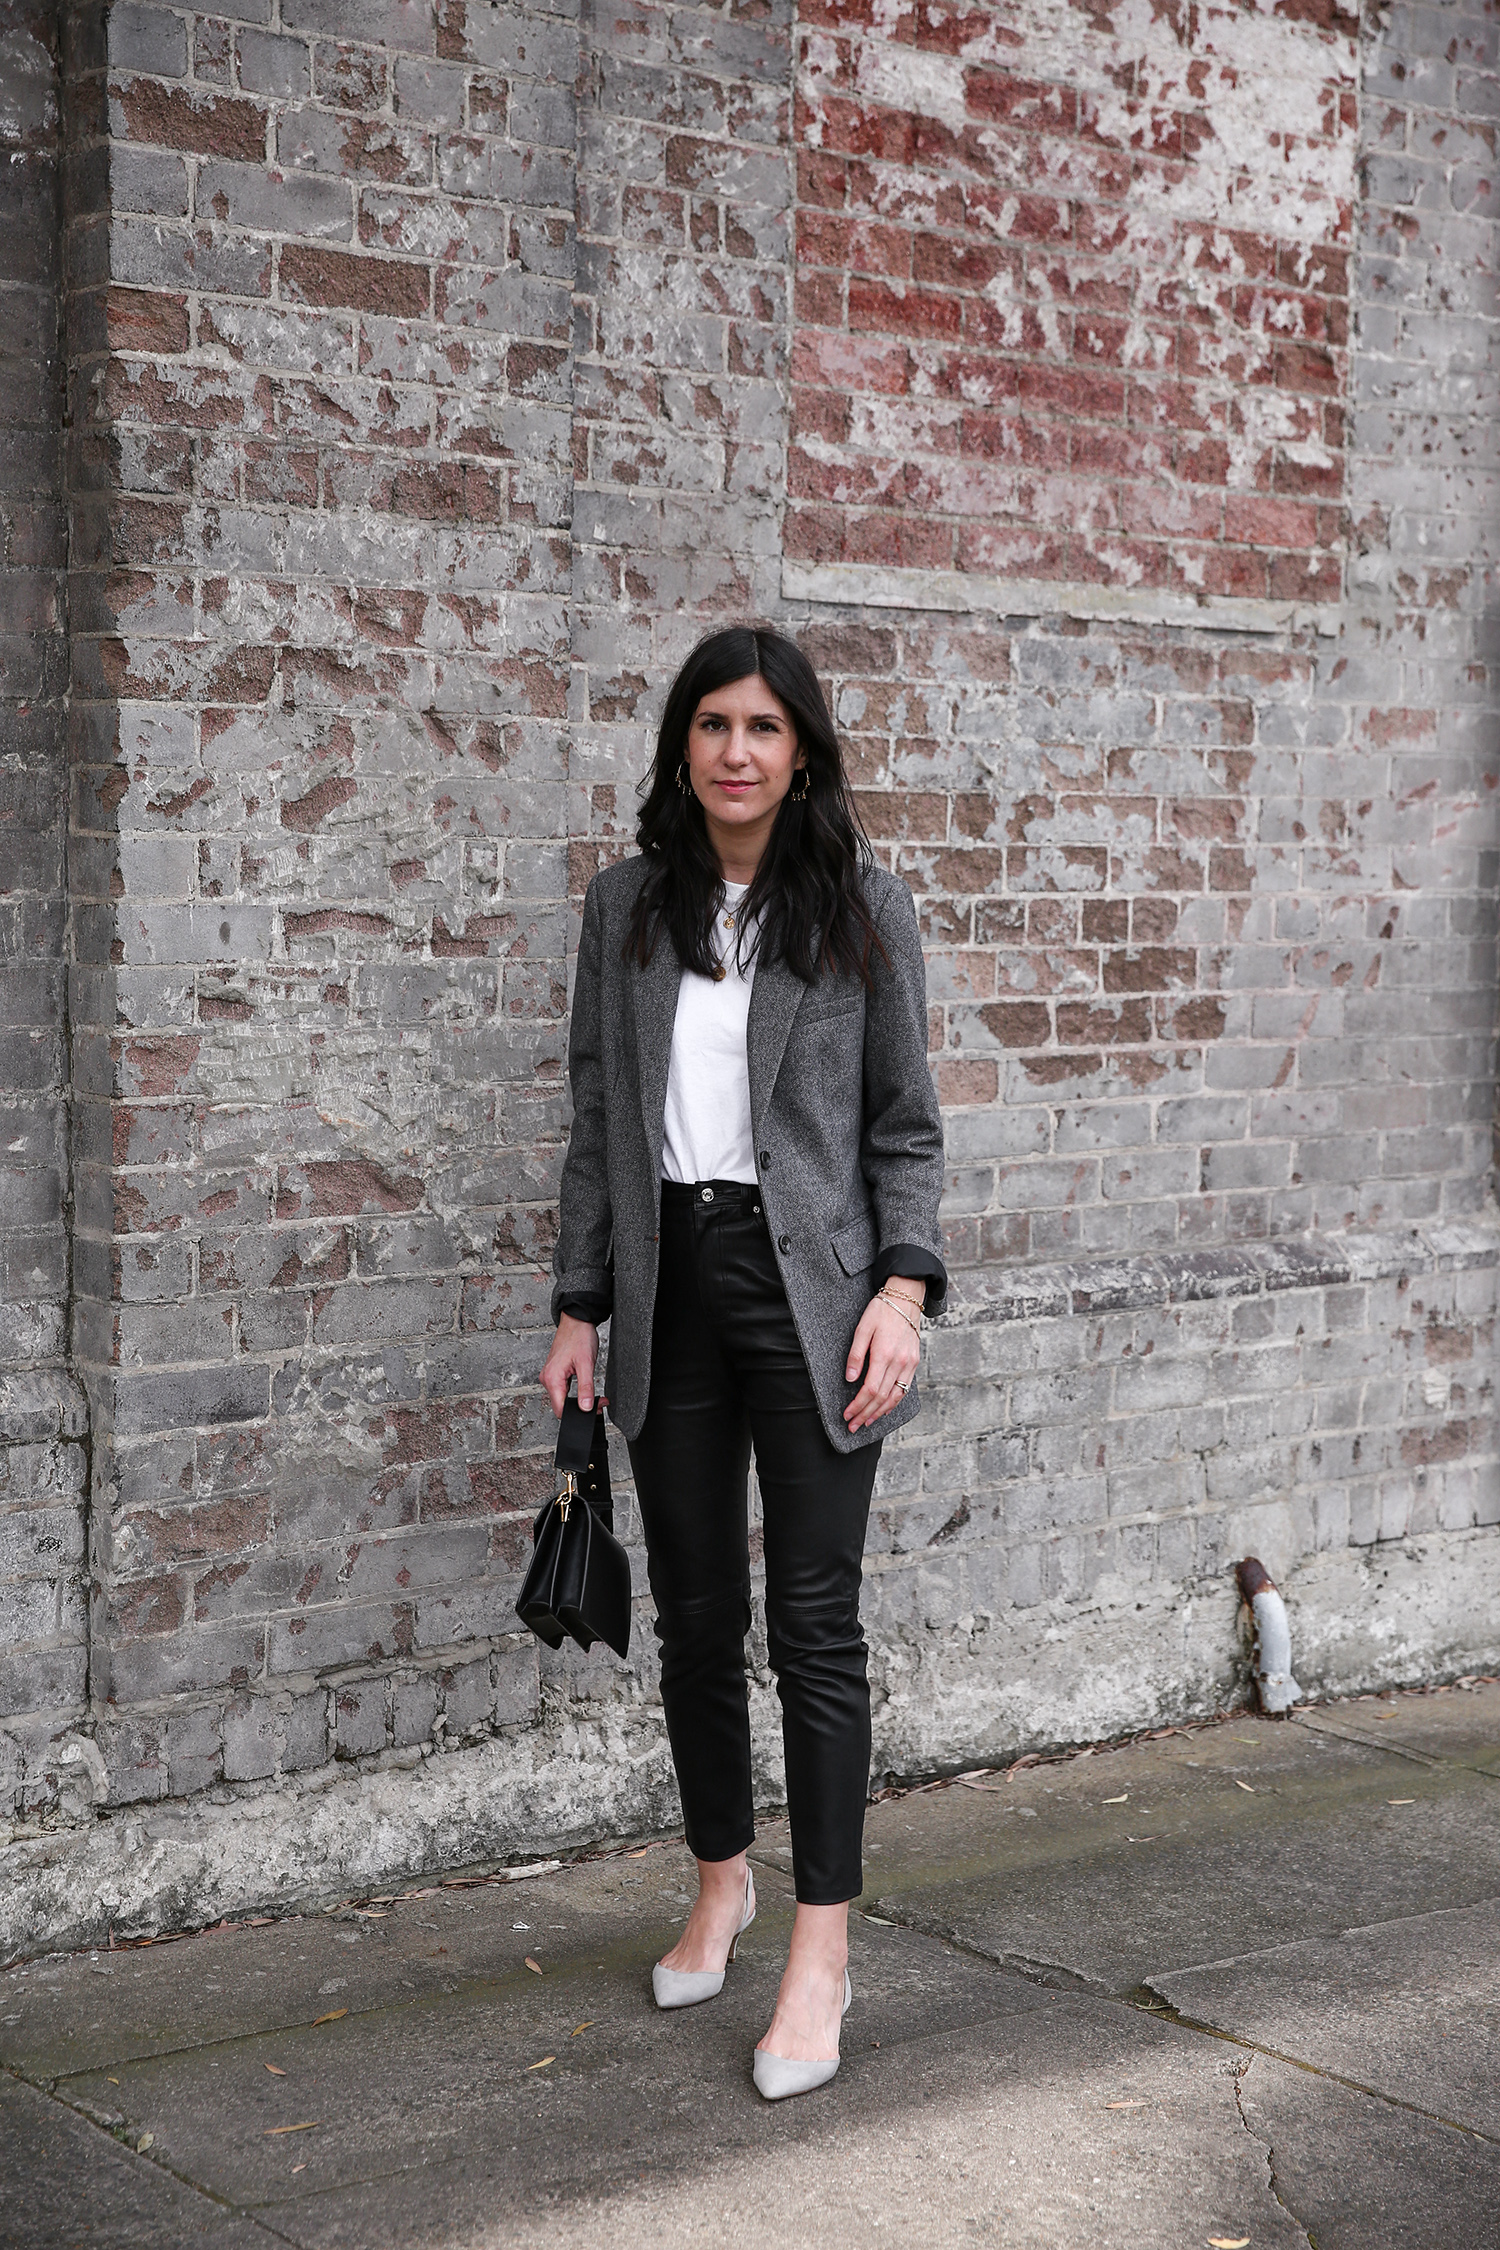 Jamie Lee of Mademoiselle wearing the Everlane oversized blazer and GRLFRND Denim leather trousers